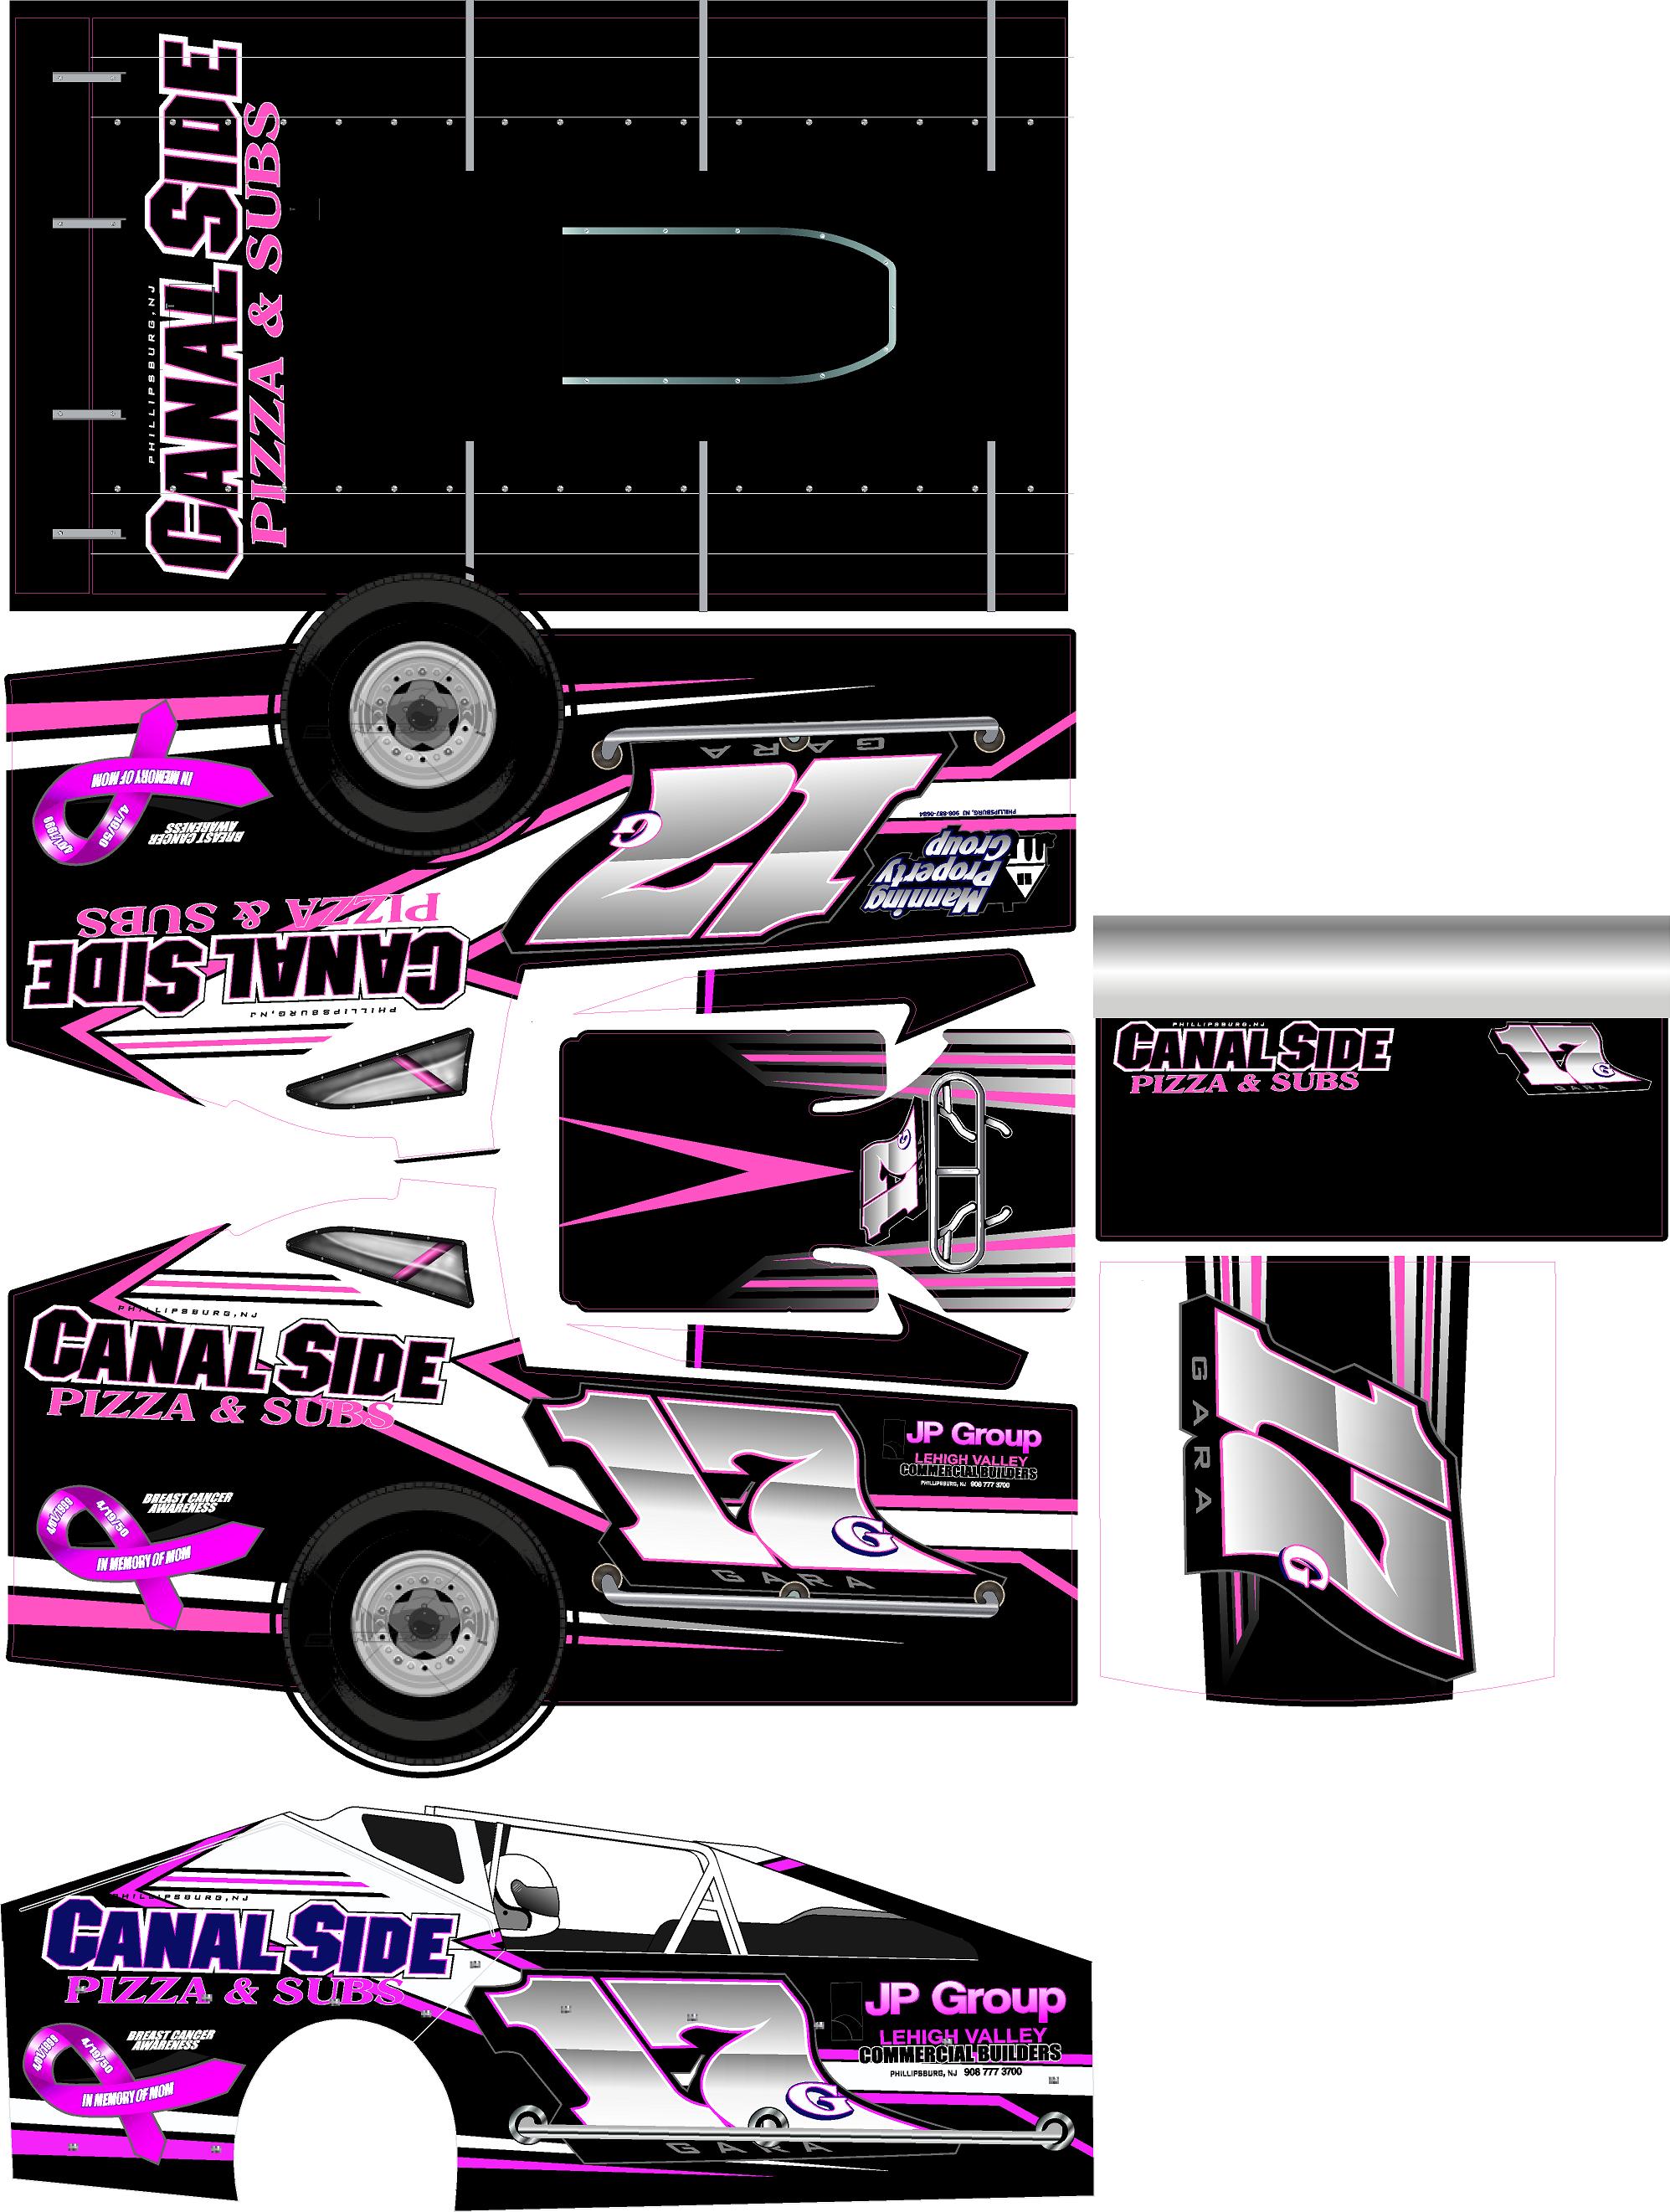 Kyle Kania 17 canal side pizza mudboss wrap 2023